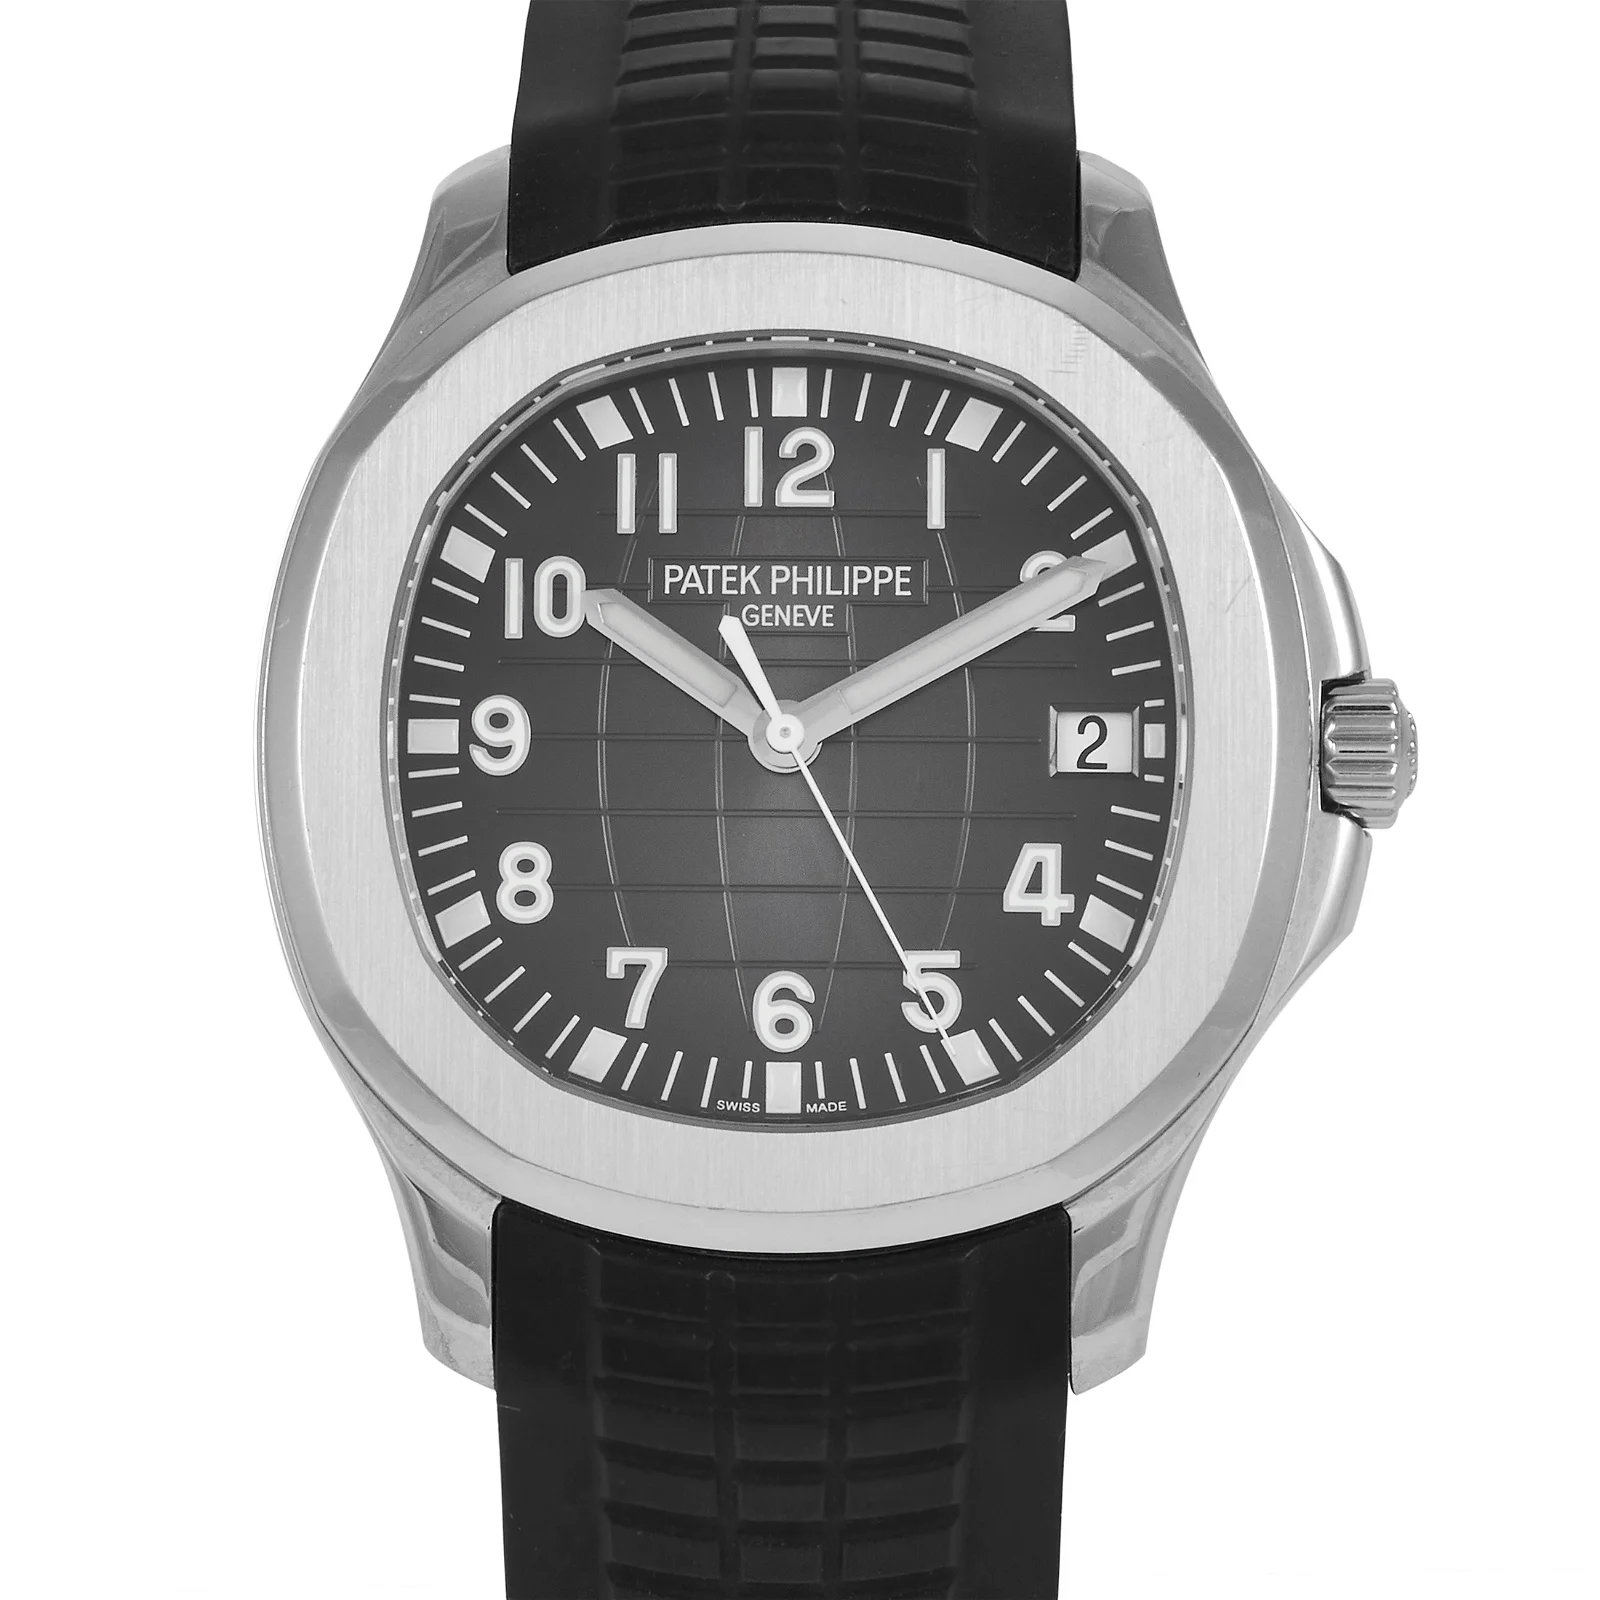 Patek Philippe Aquanut Stainless Steel Watch 5167A-001